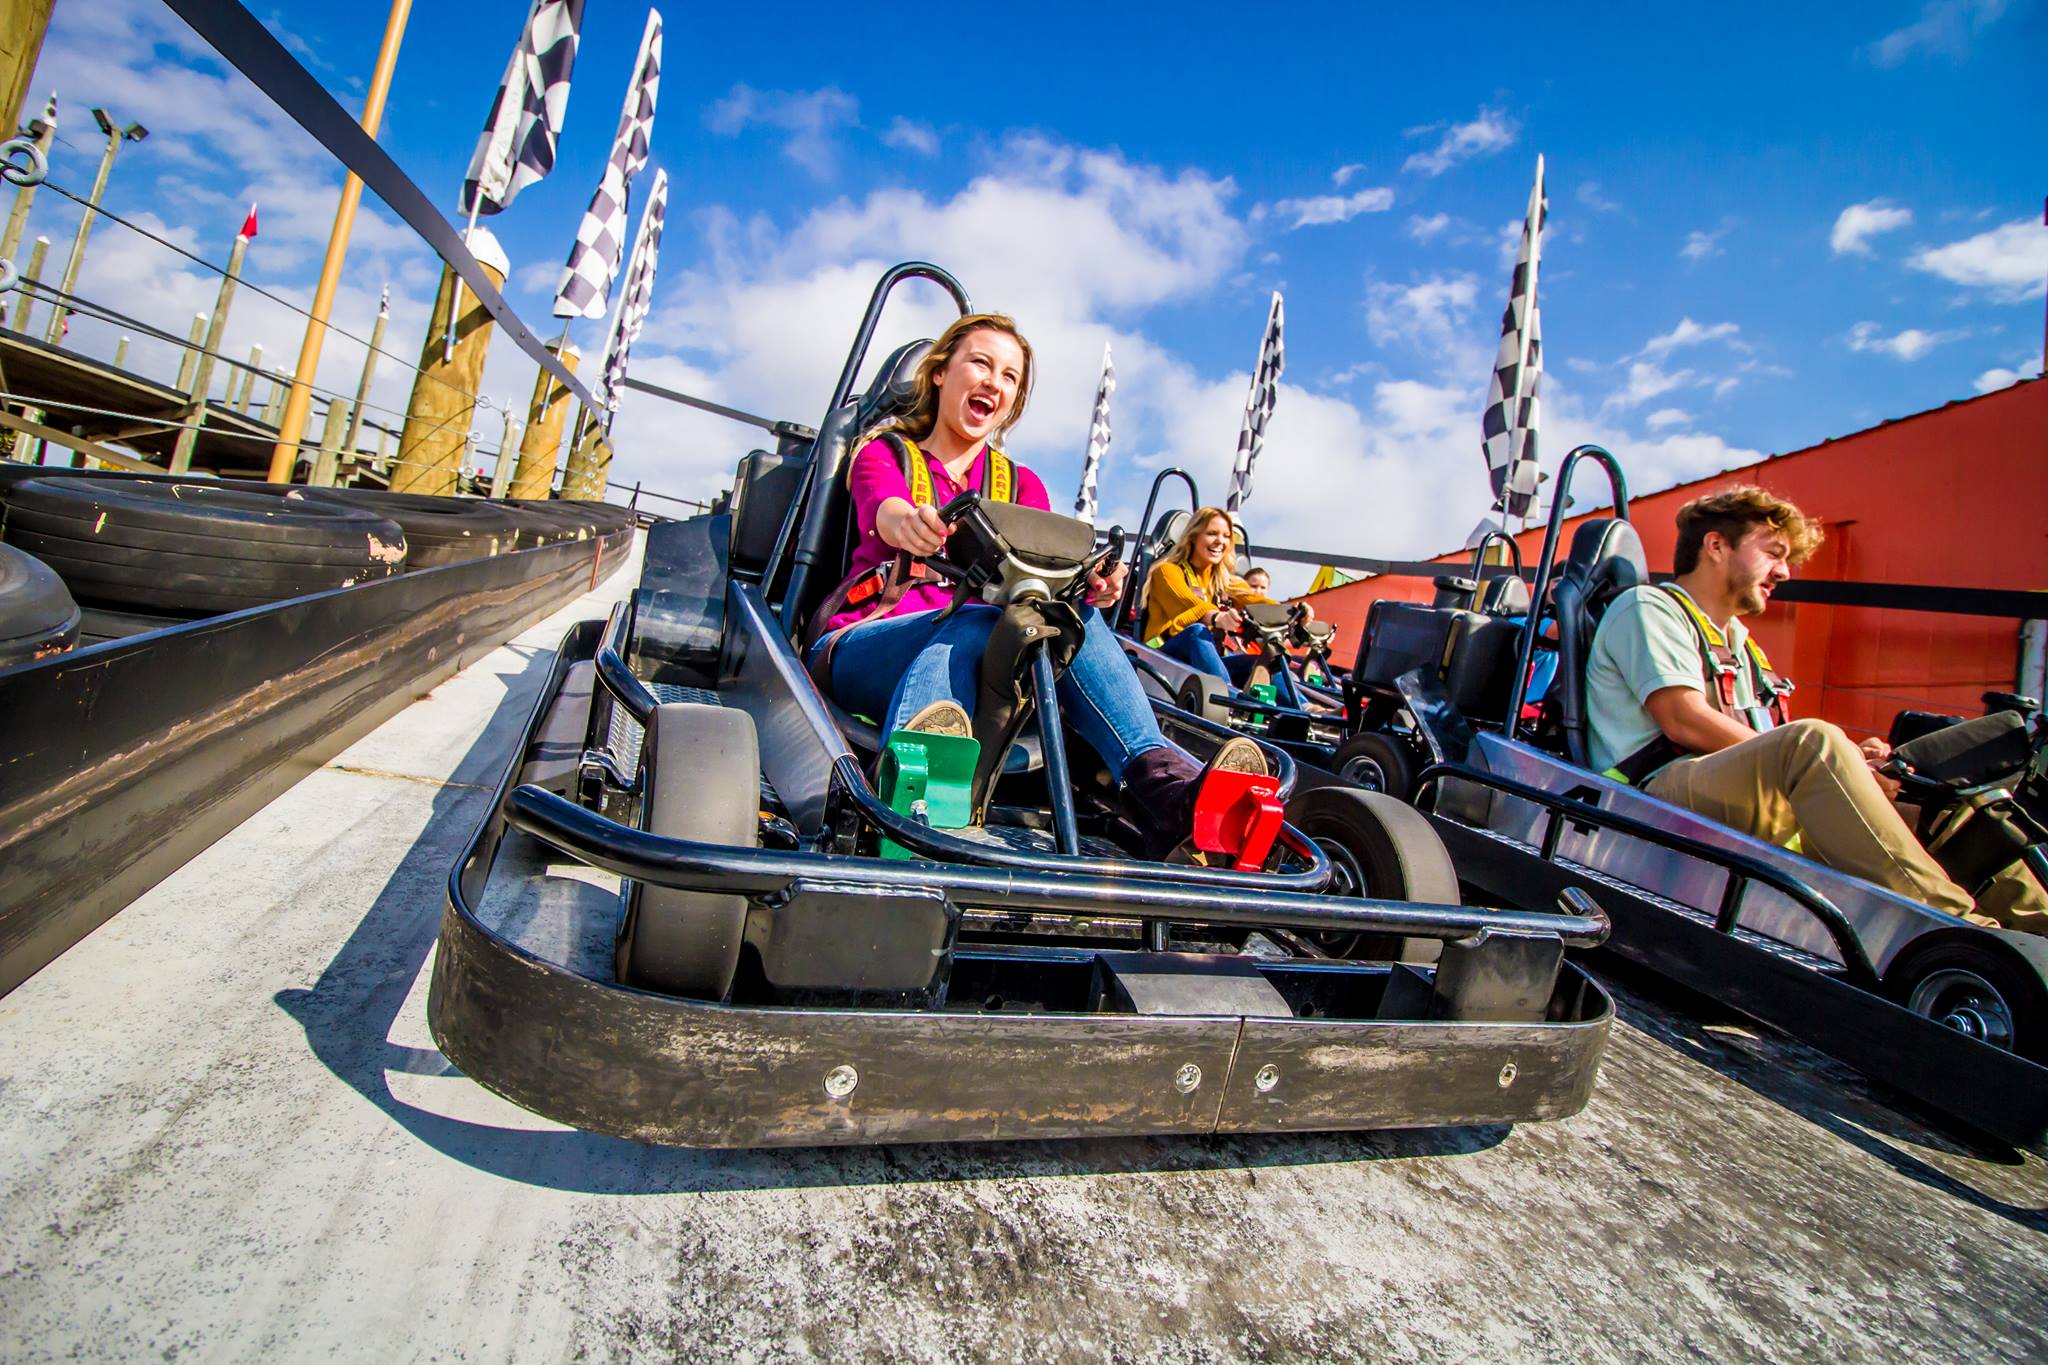 Best Go Karts In Pigeon Forge Topjump Trampoline Extreme Arena Pigeon Forge Tn